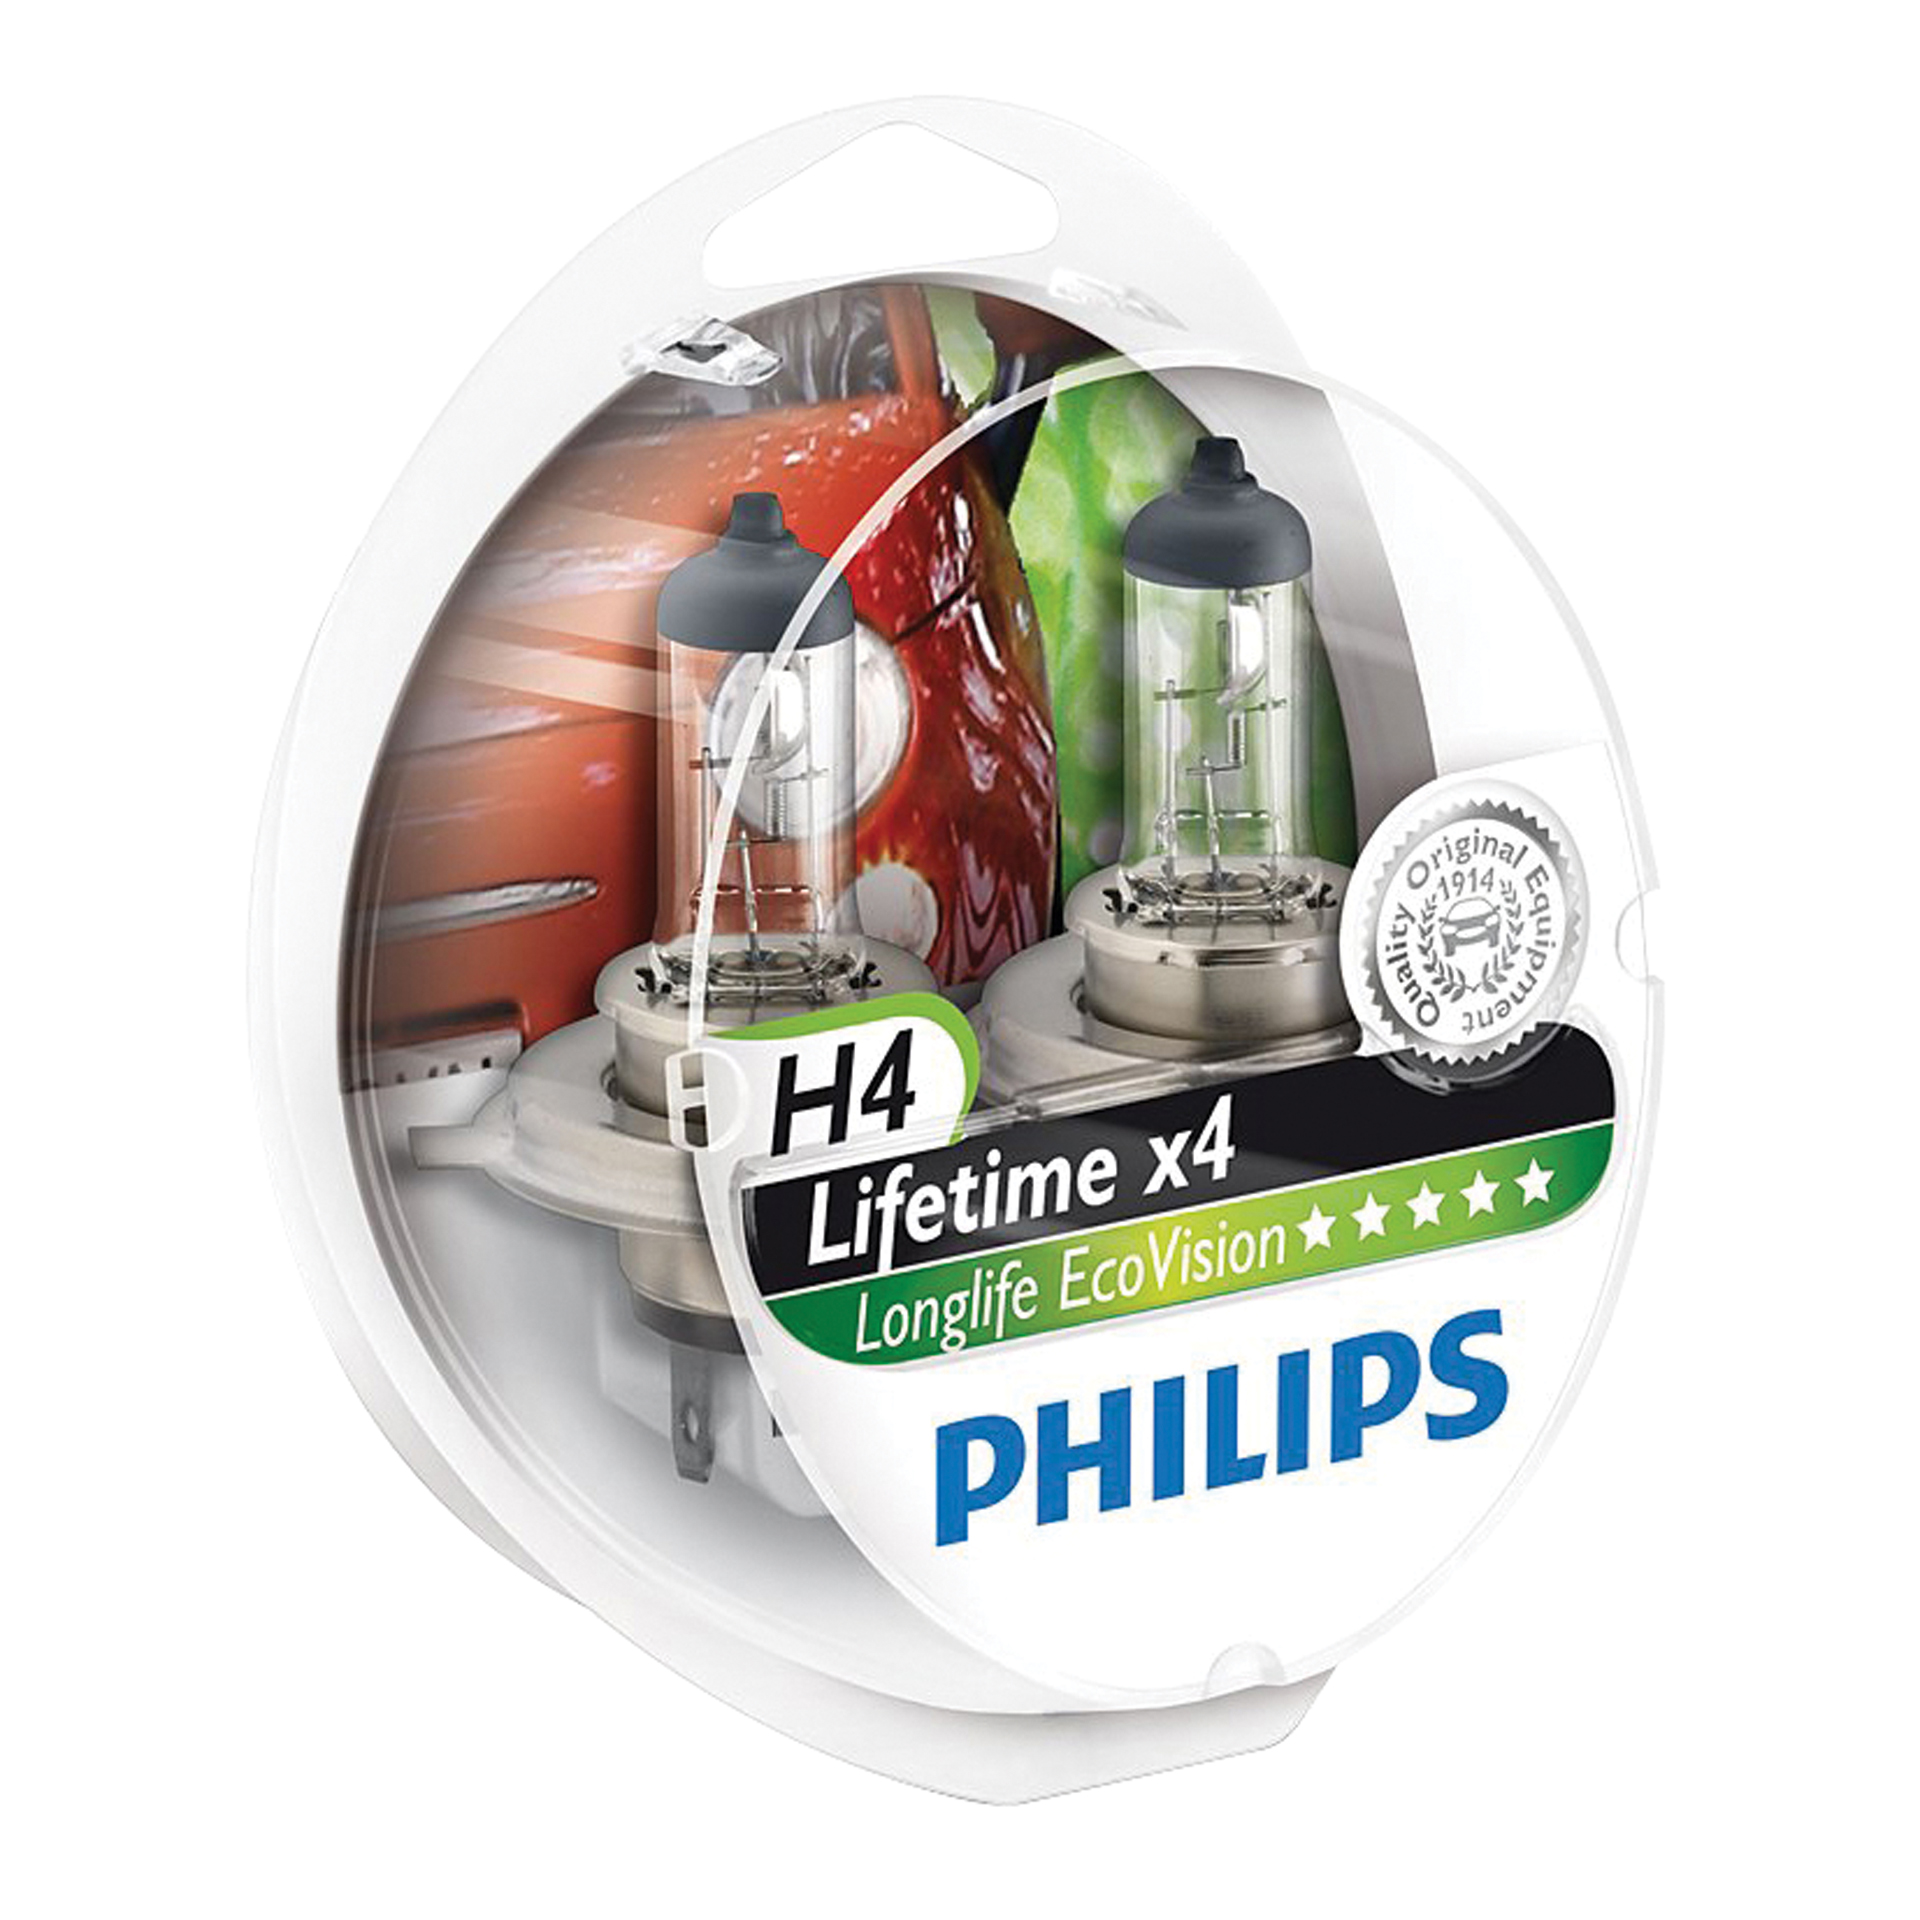 Philips Philips 12342 H4 Longlife EcoVision S2 0730537